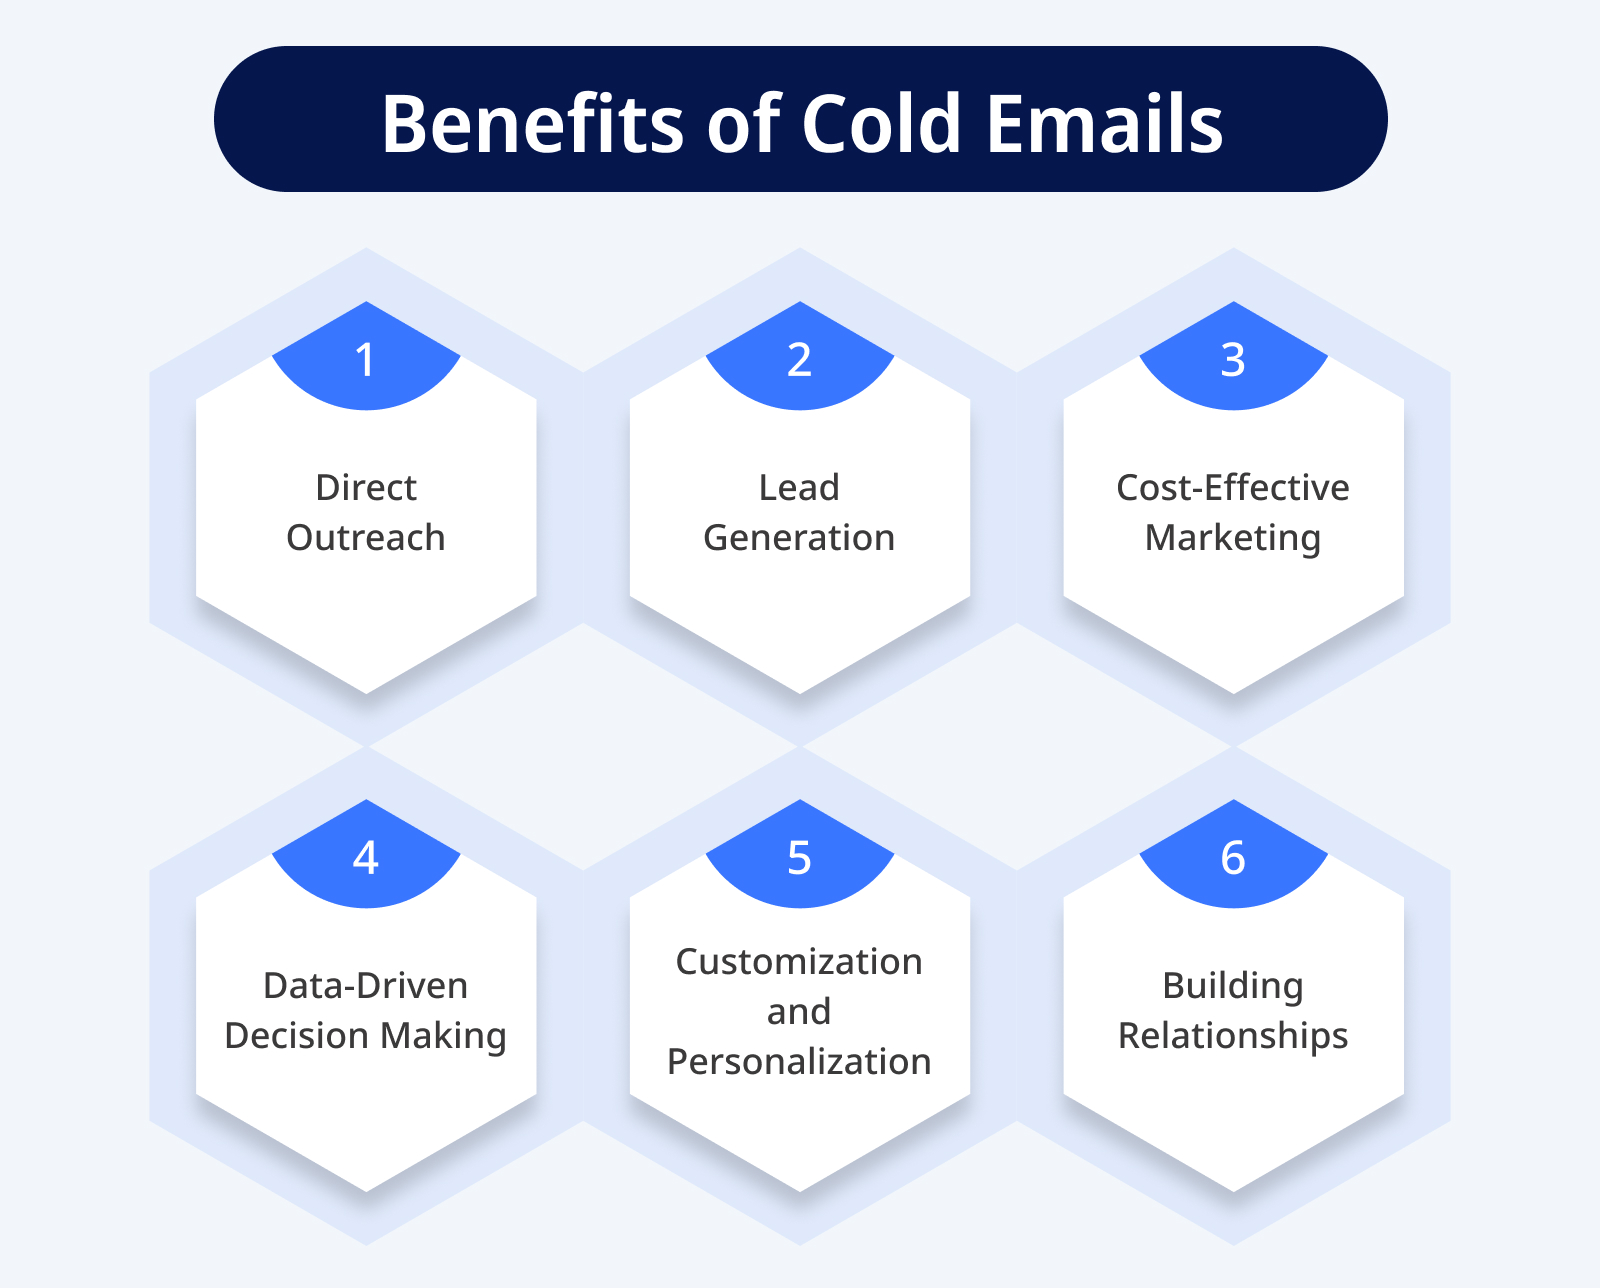 Benefits of Cold Emails